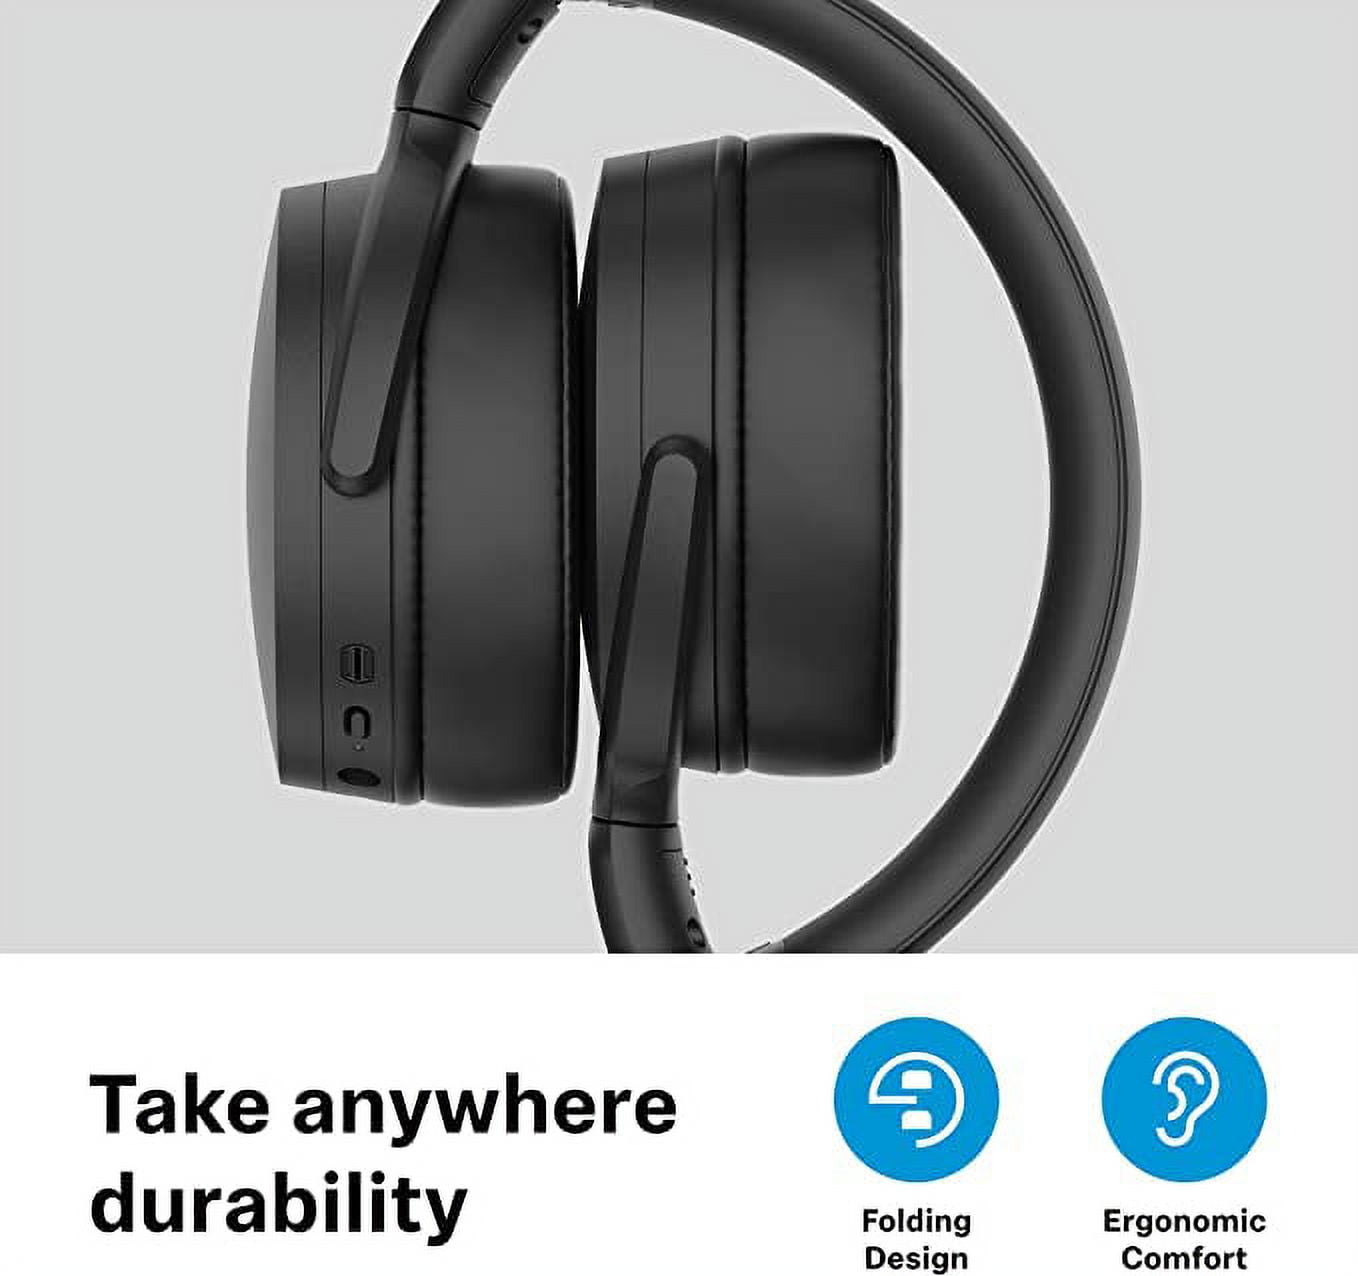  Sennheiser Consumer Audio HD 450BT Bluetooth 5.0 Wireless  Headphone with Active Noise Cancellation - 30-Hour Battery Life, USB-C Fast  Charging, Virtual Assistant Button, Foldable - Black : Electronics